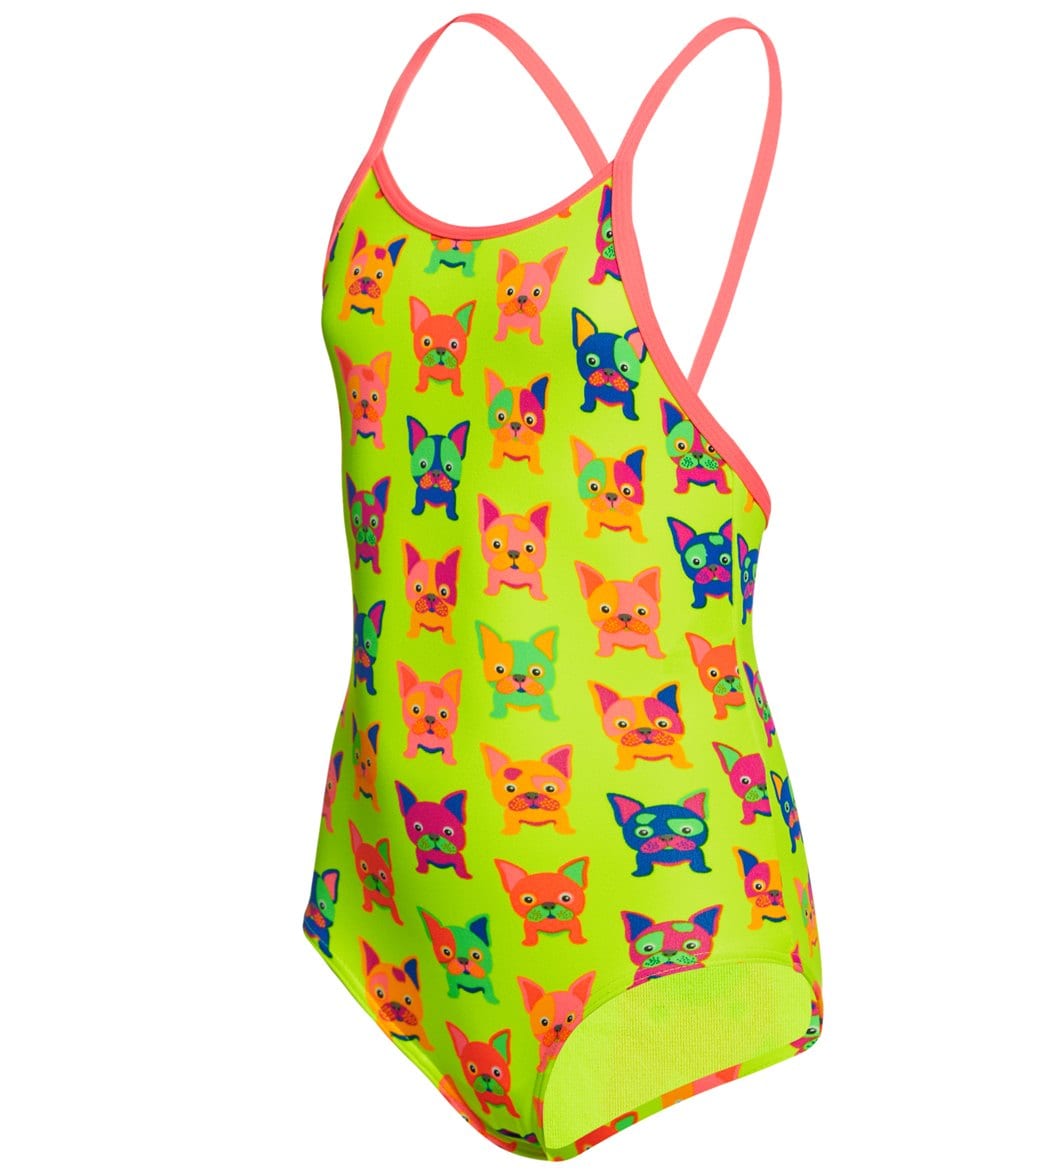 Funkita Toddler Girls' Hot Diggity One Piece Swimsuit - Multi 1T Polyester - Swimoutlet.com